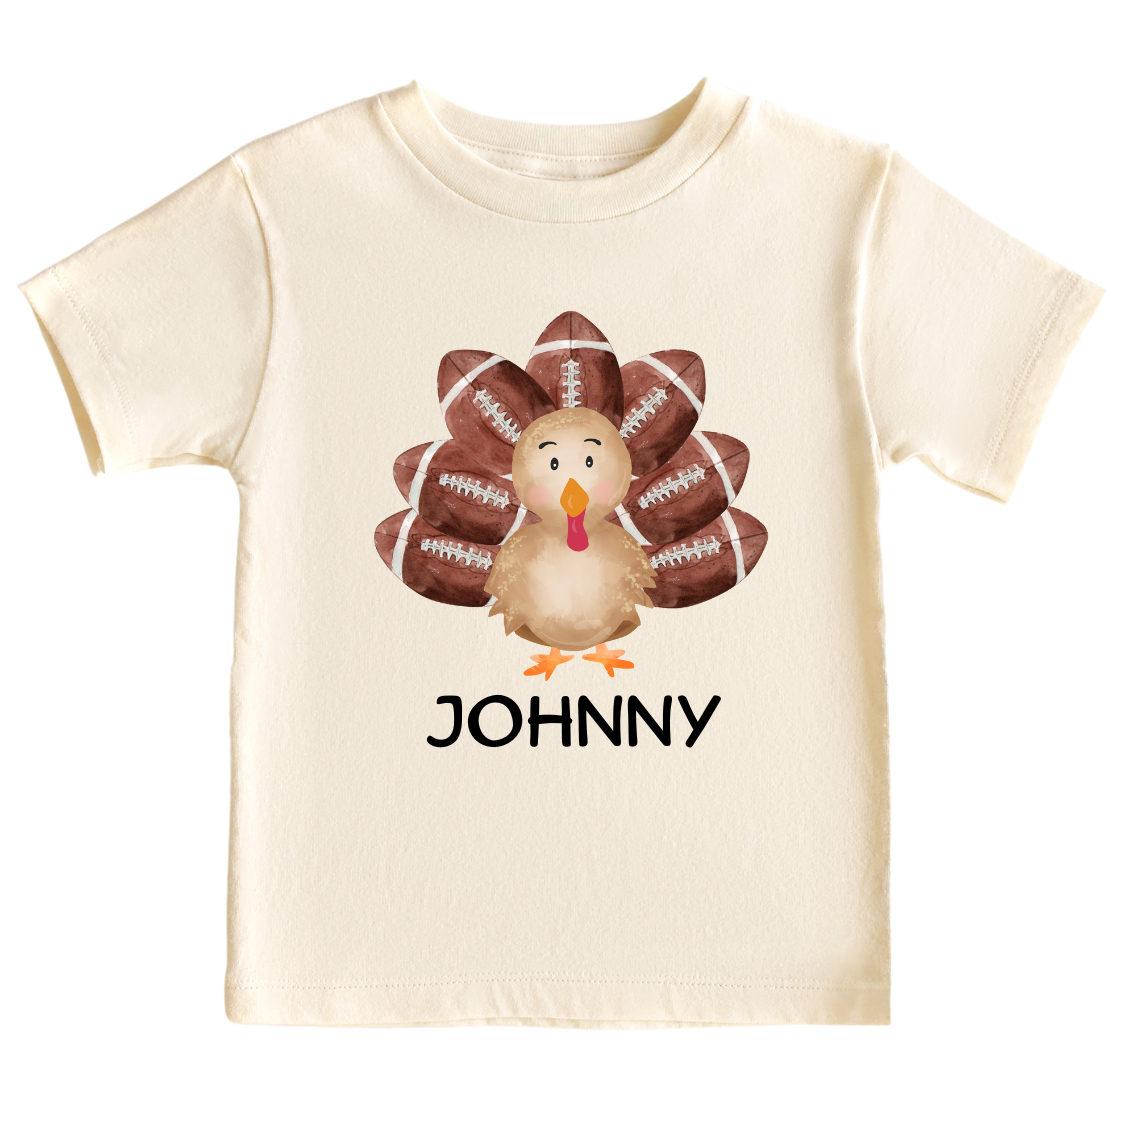 baby girl clothes baby essentials baby boy clothes newborn essentials must haves baby bodysuit gender neutral baby clothes baby boy outfits baby onesies newborn onesies baby girl onesies funny baby onesies baby announcement onesie personalized baby girl gifts custom baby onesie